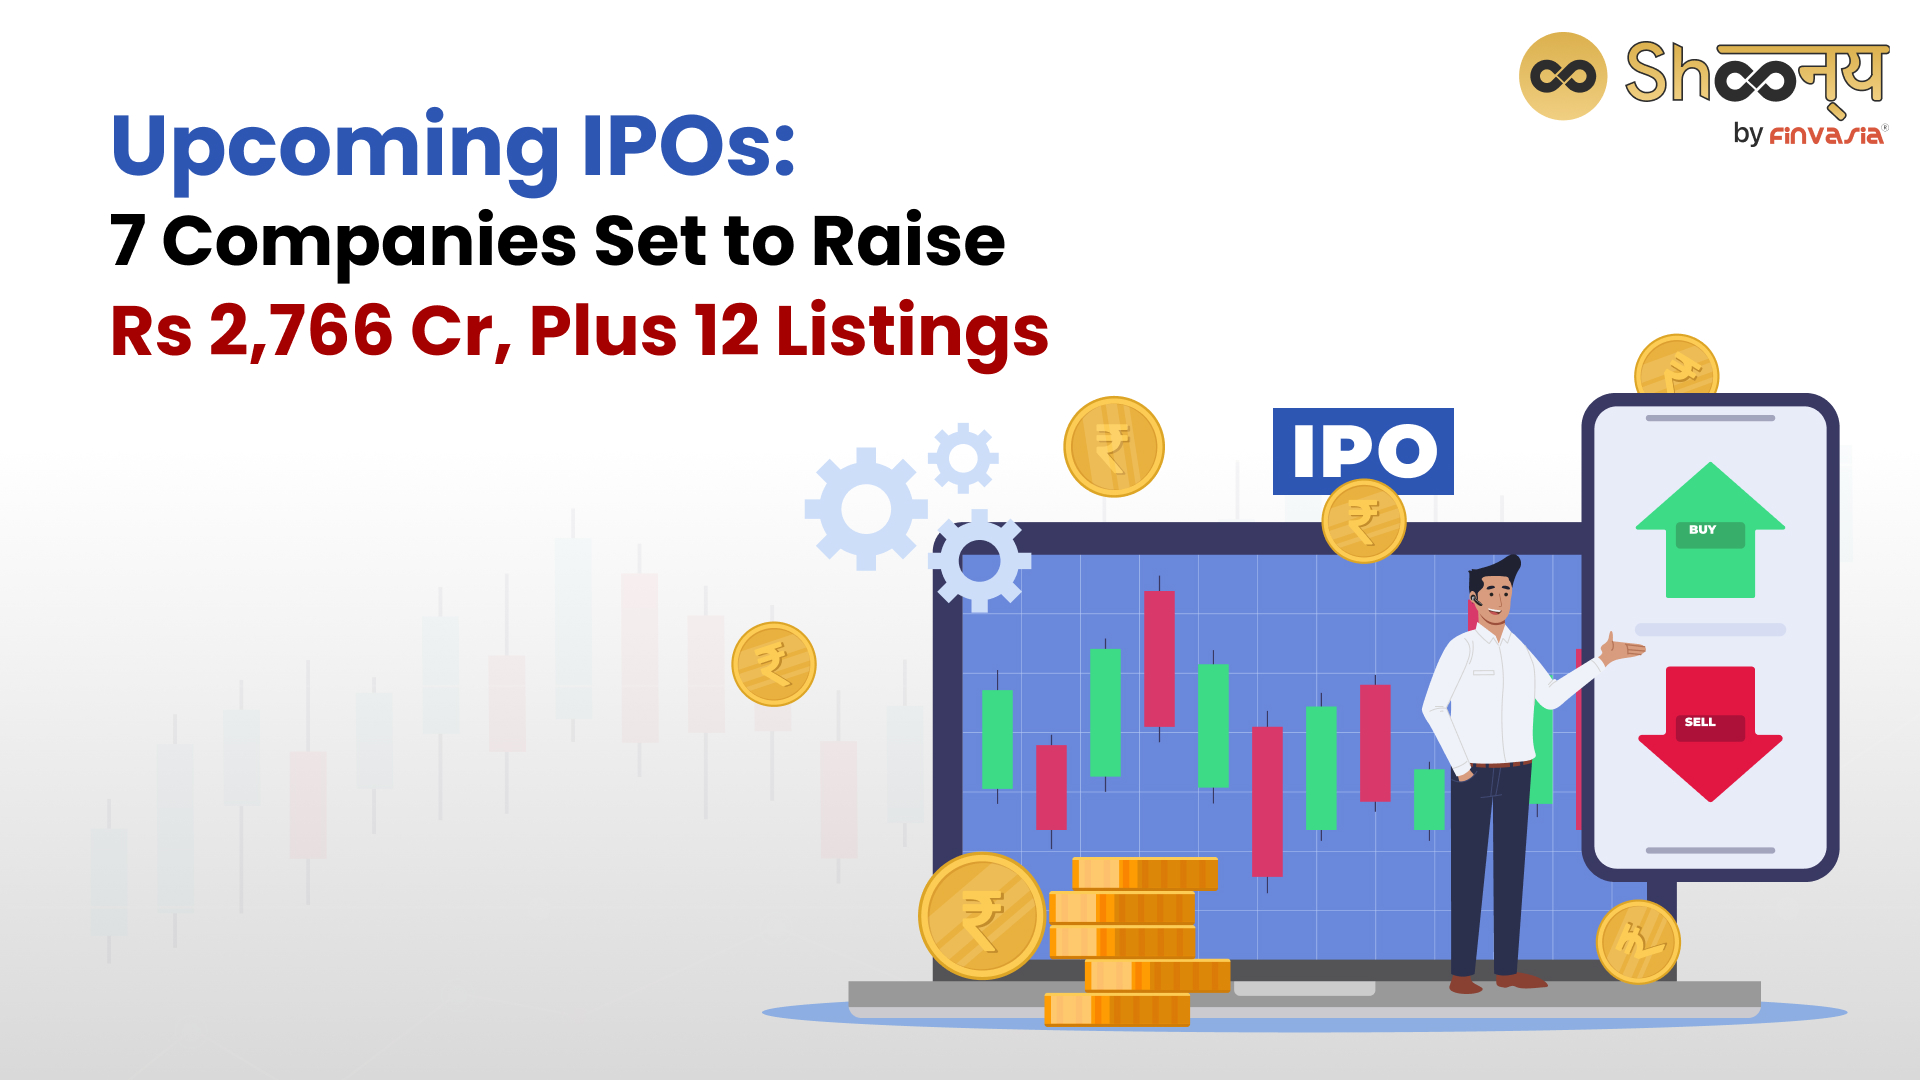 
  Upcoming IPOs to Feature 7 Companies Raising Rs 2,766 Cr, Alongside 12 Listings!